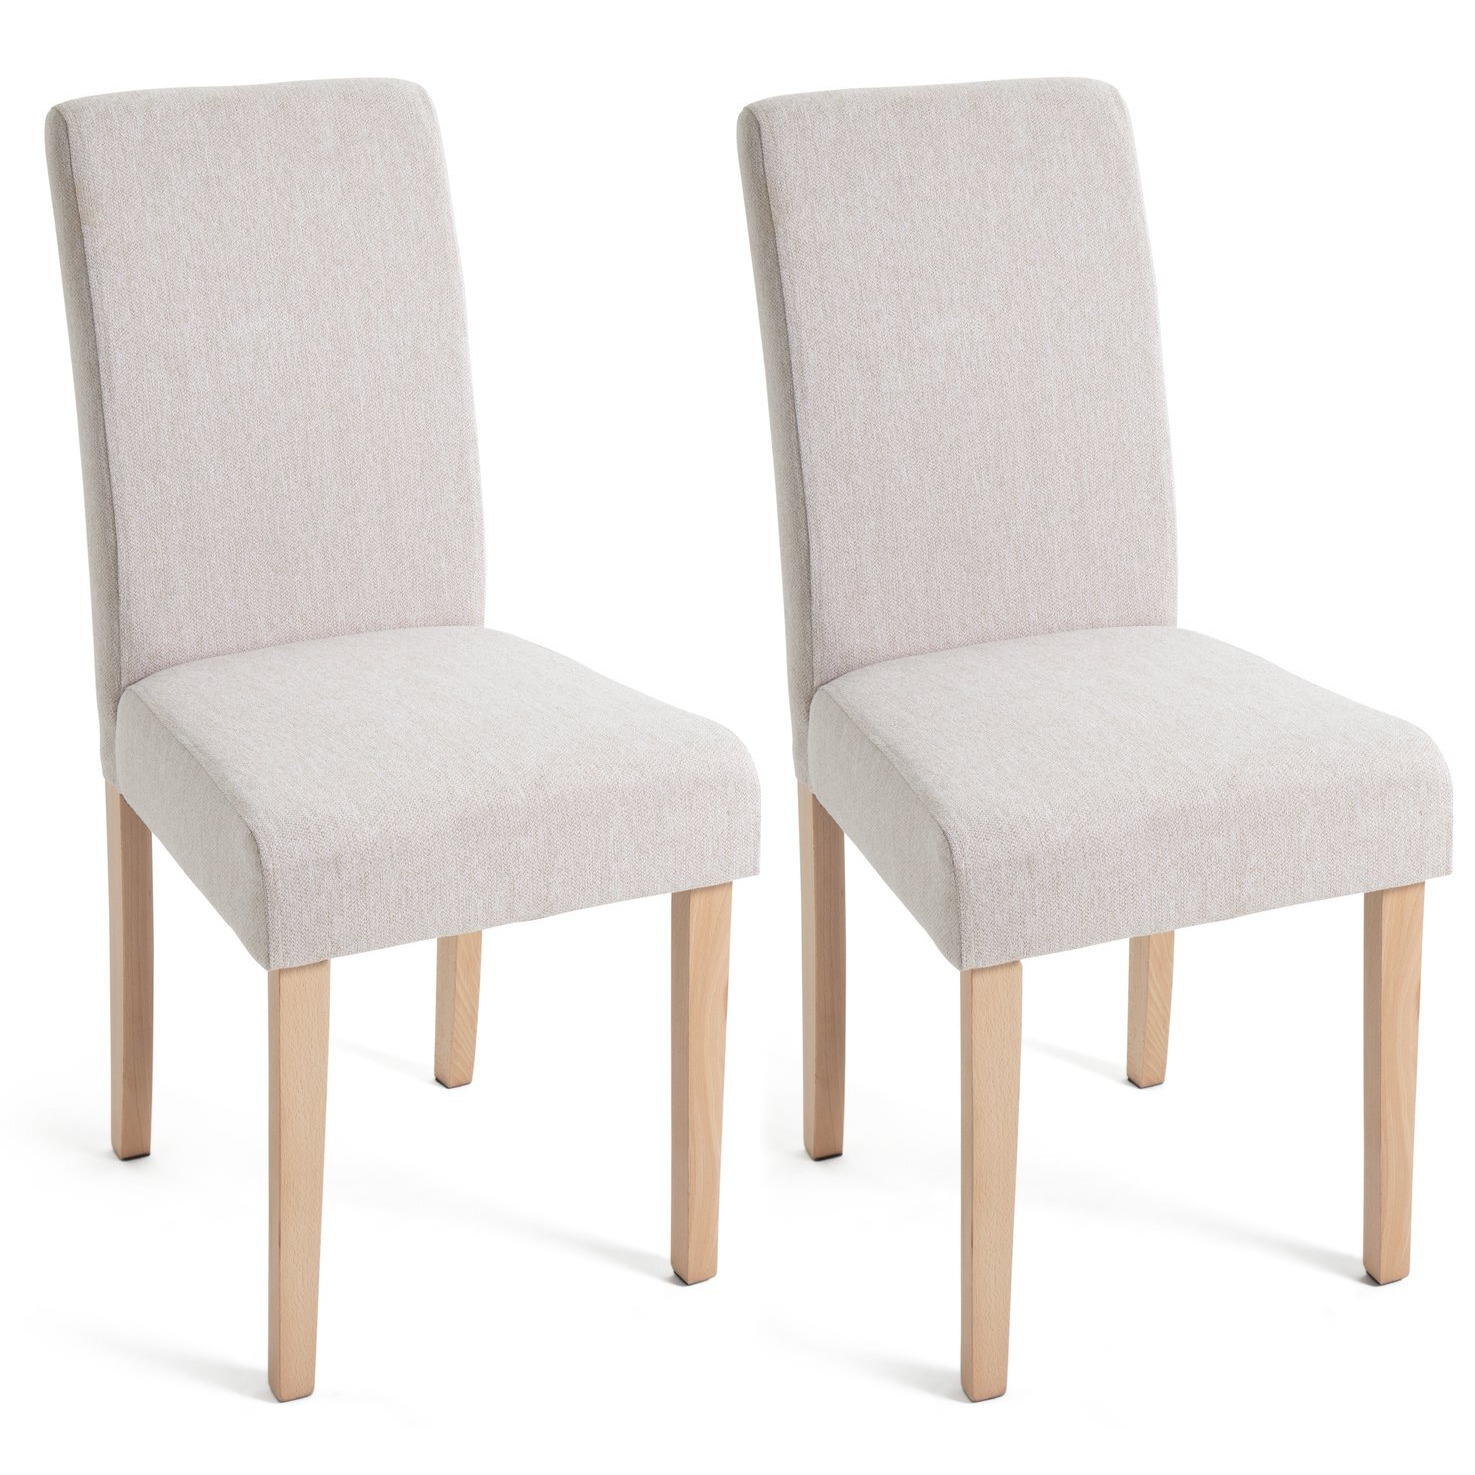 Argos Home Midback Pair of Fabric Dining Chairs - Cream - image 1